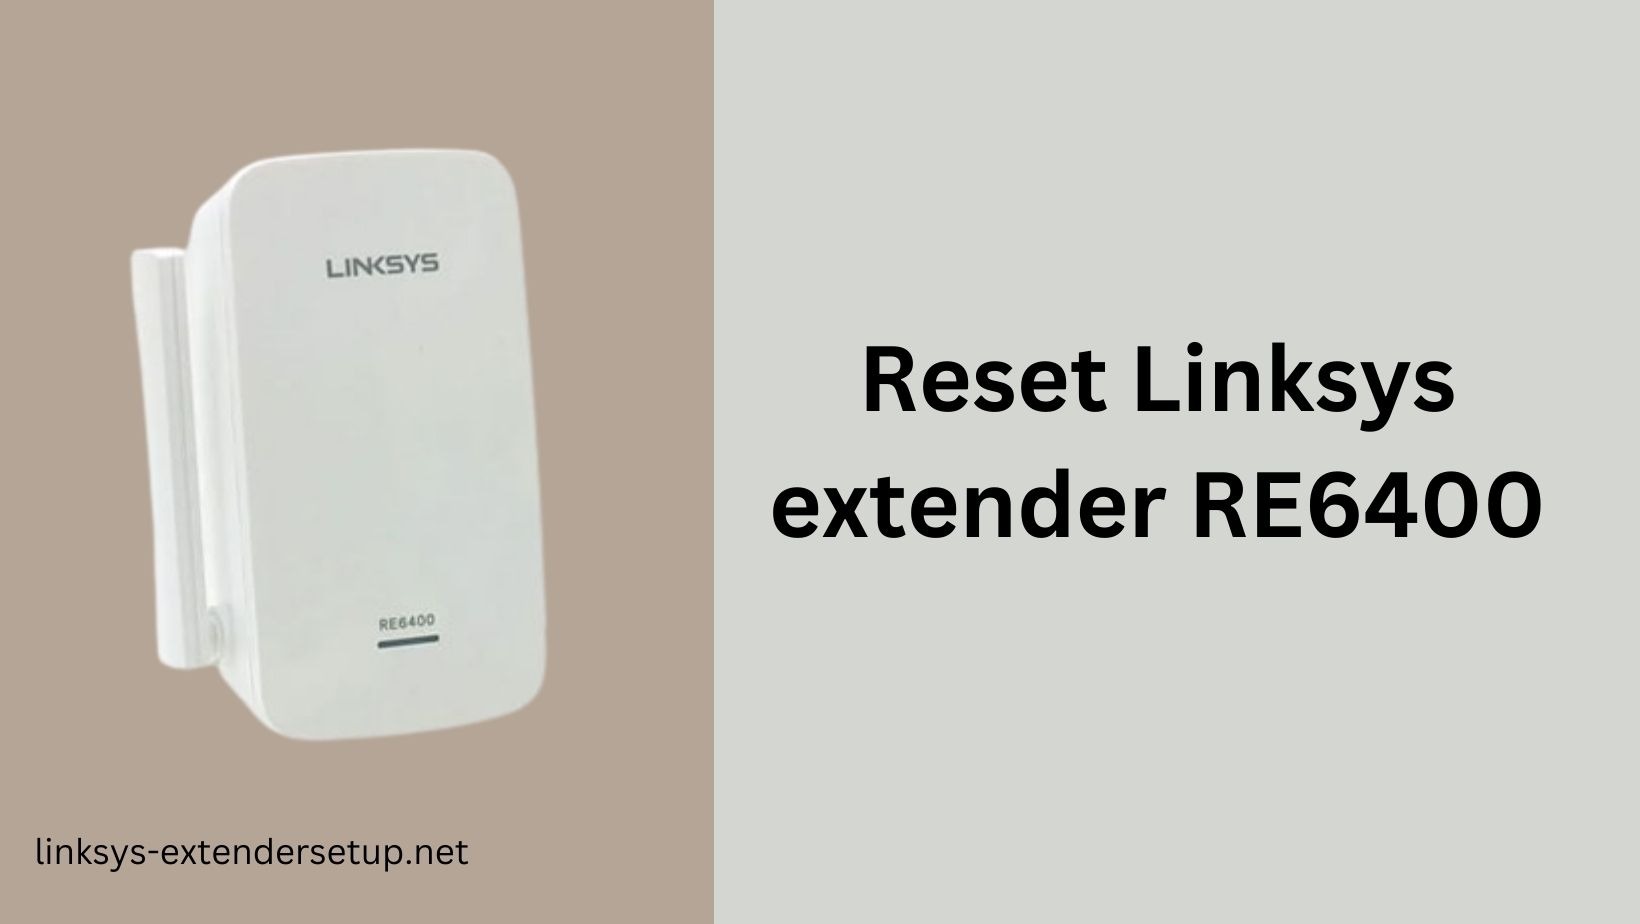 You are currently viewing A Flash Guide on Resetting Linksys Extender RE6400